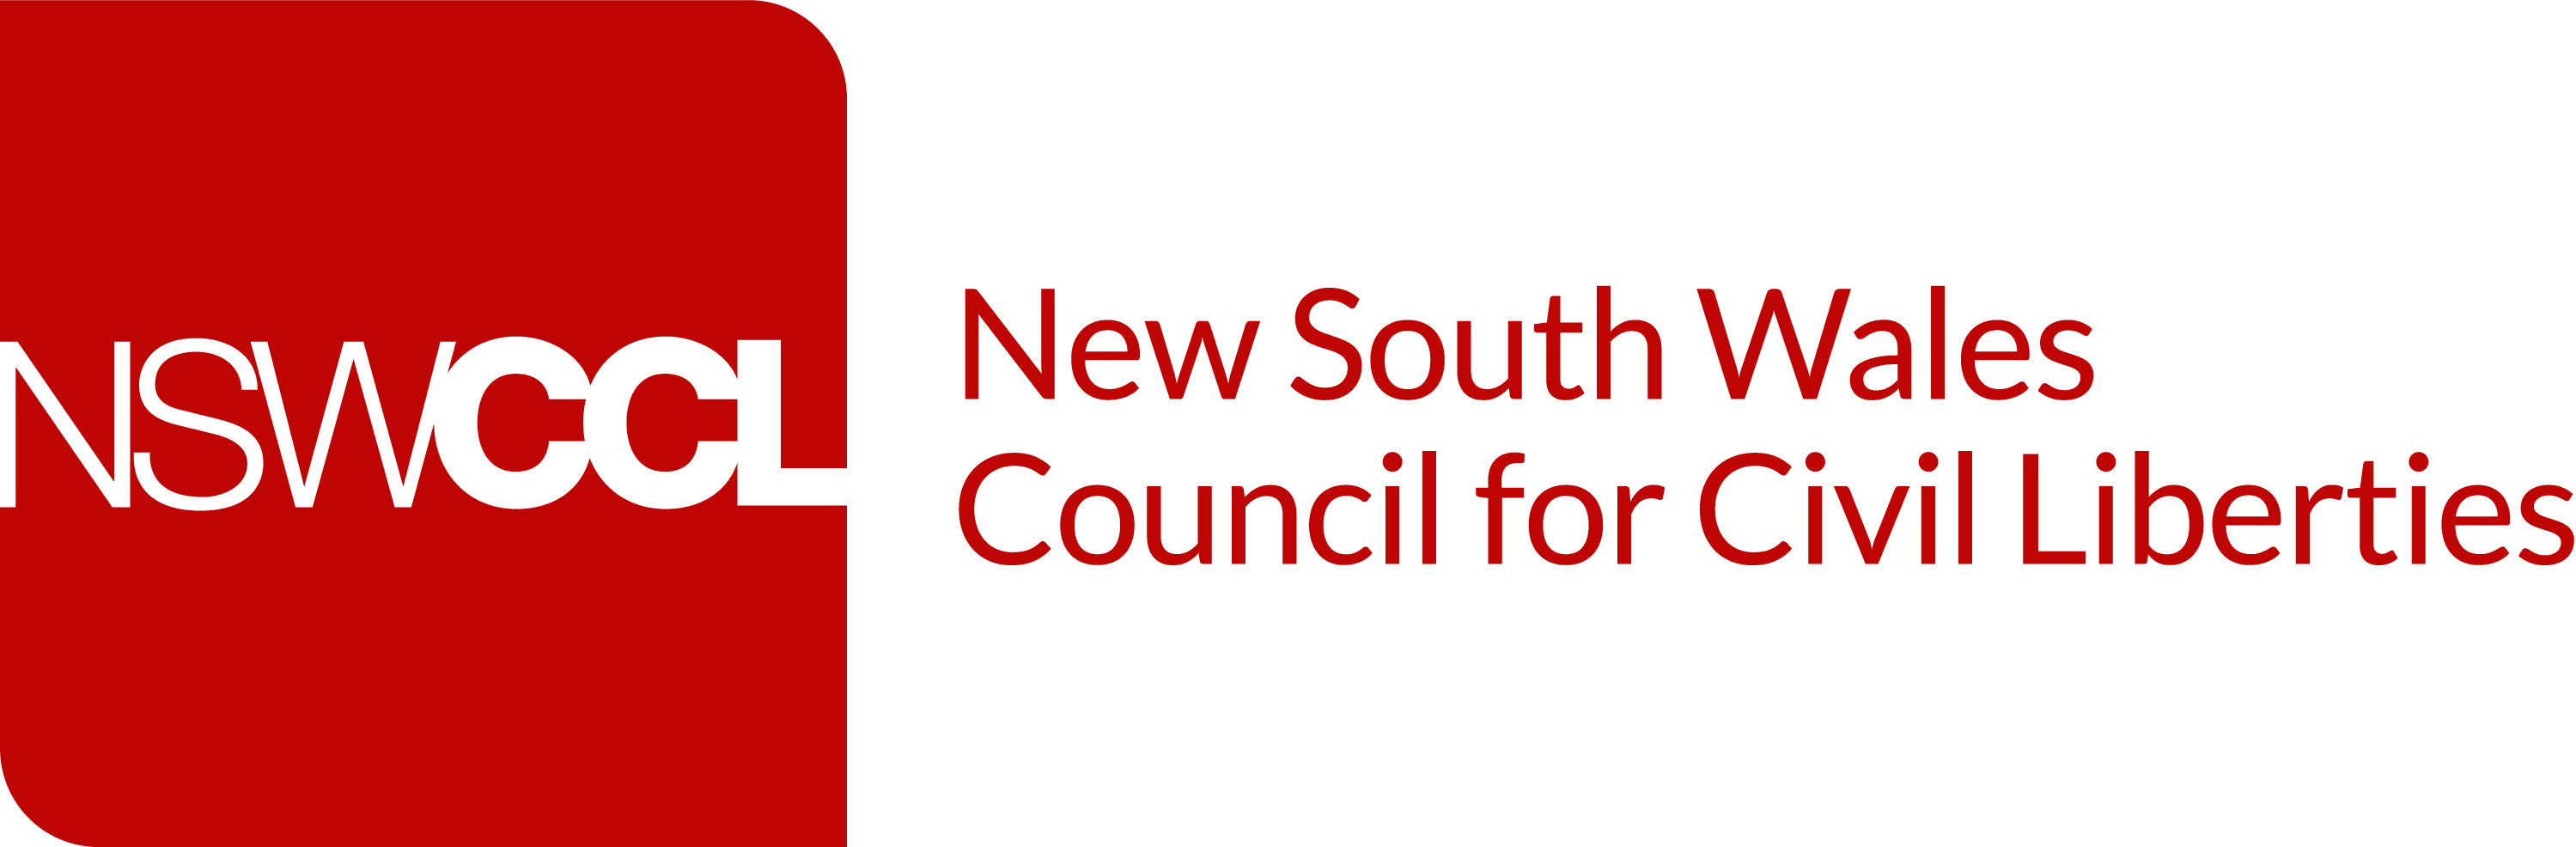 New South Wales Council for Civil Liberties